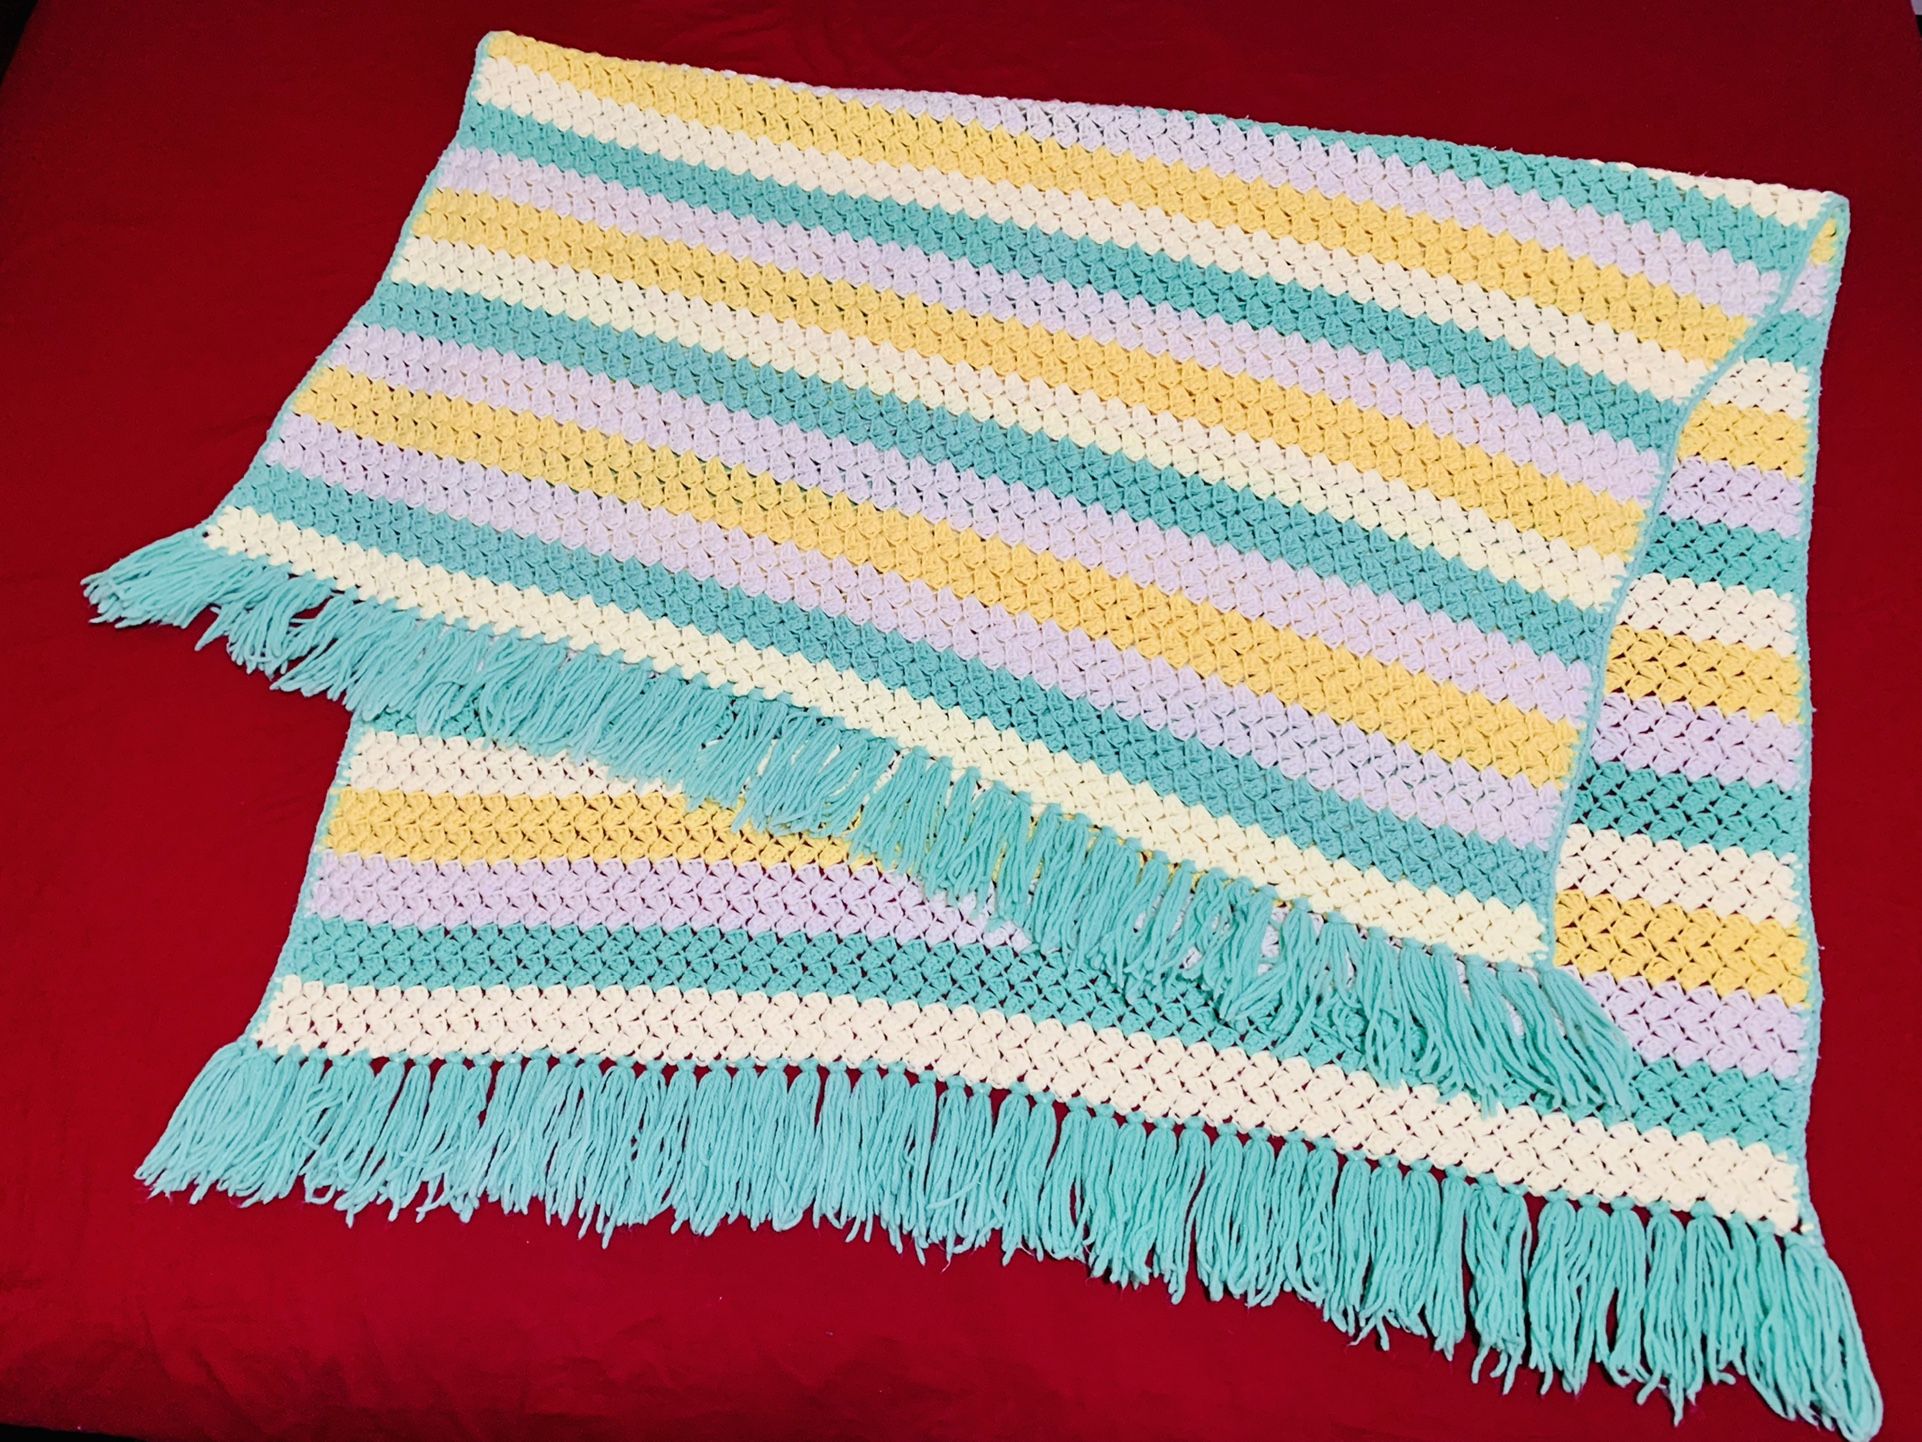 Hand Crocheted Green/Yellow/White Striped Afghan Throw Blanket 64”x 50” 